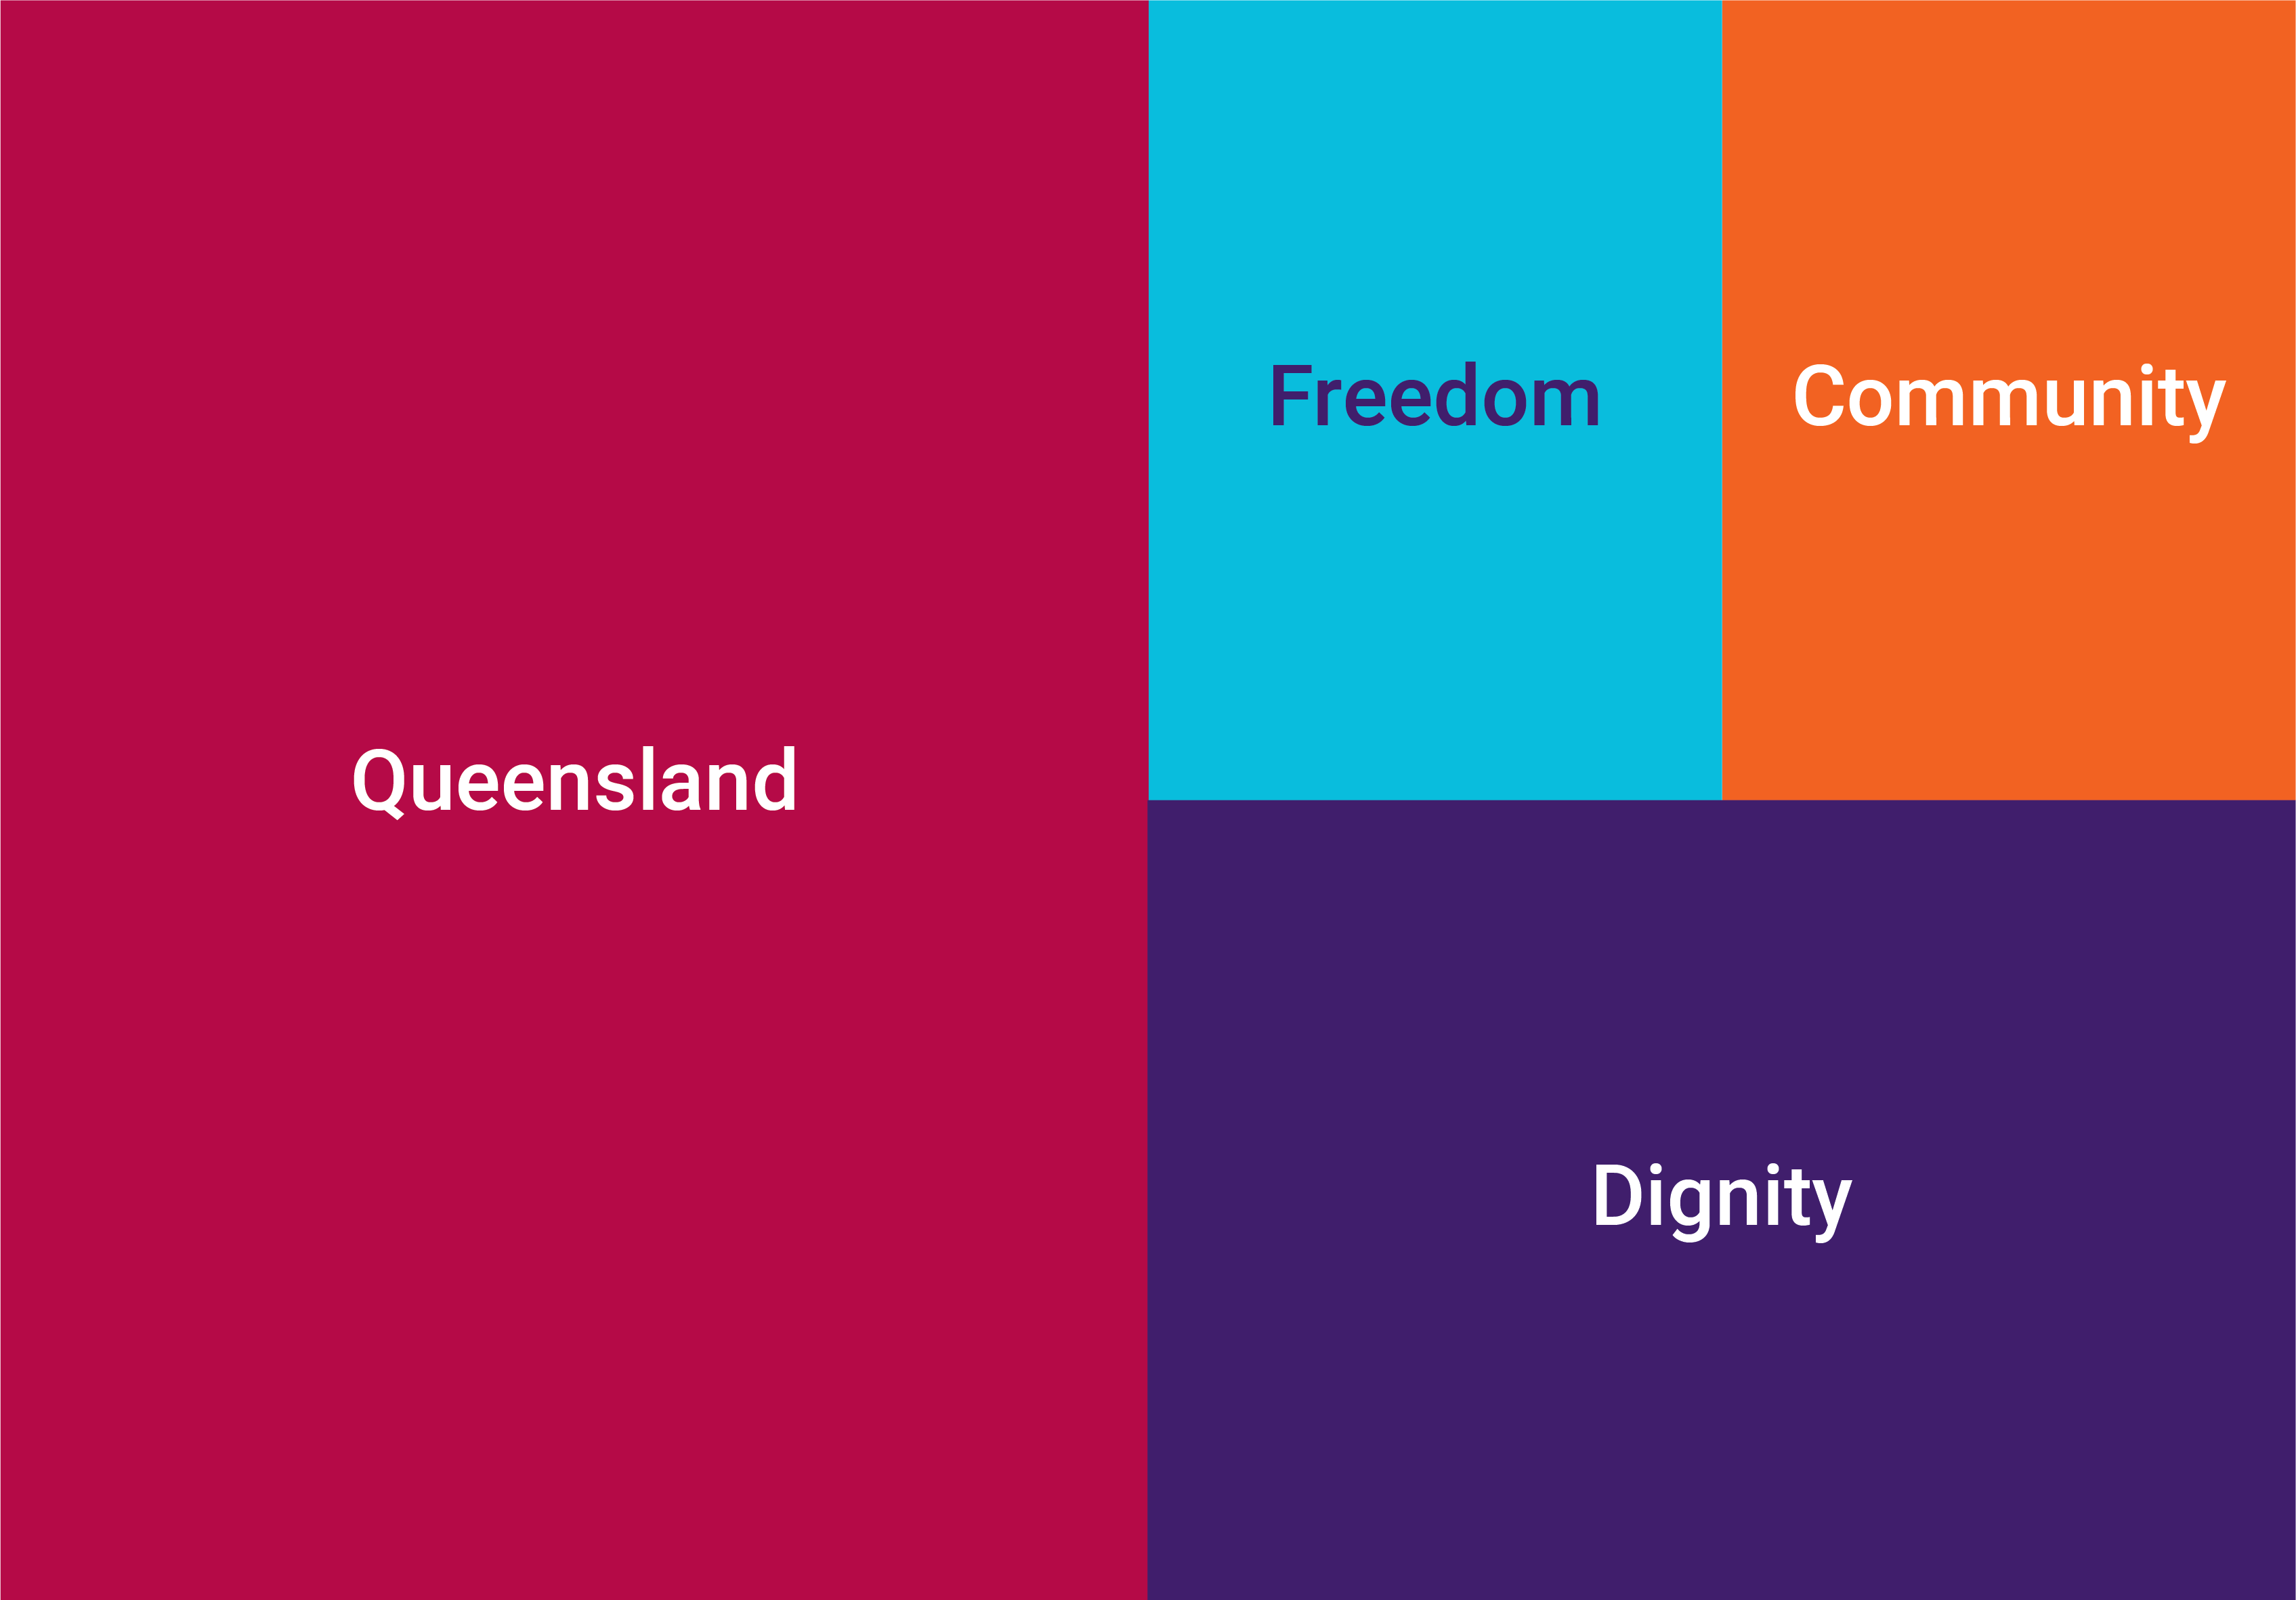 4 rectangles of colour. Left side has large maroon section with text "Queensland" in the middle, bottom right has medium purple section with text "Dignity" in the middle. Top right is divided into two small sections, a blue one with text "Freedom" and an orange one with "Community" in the middle.